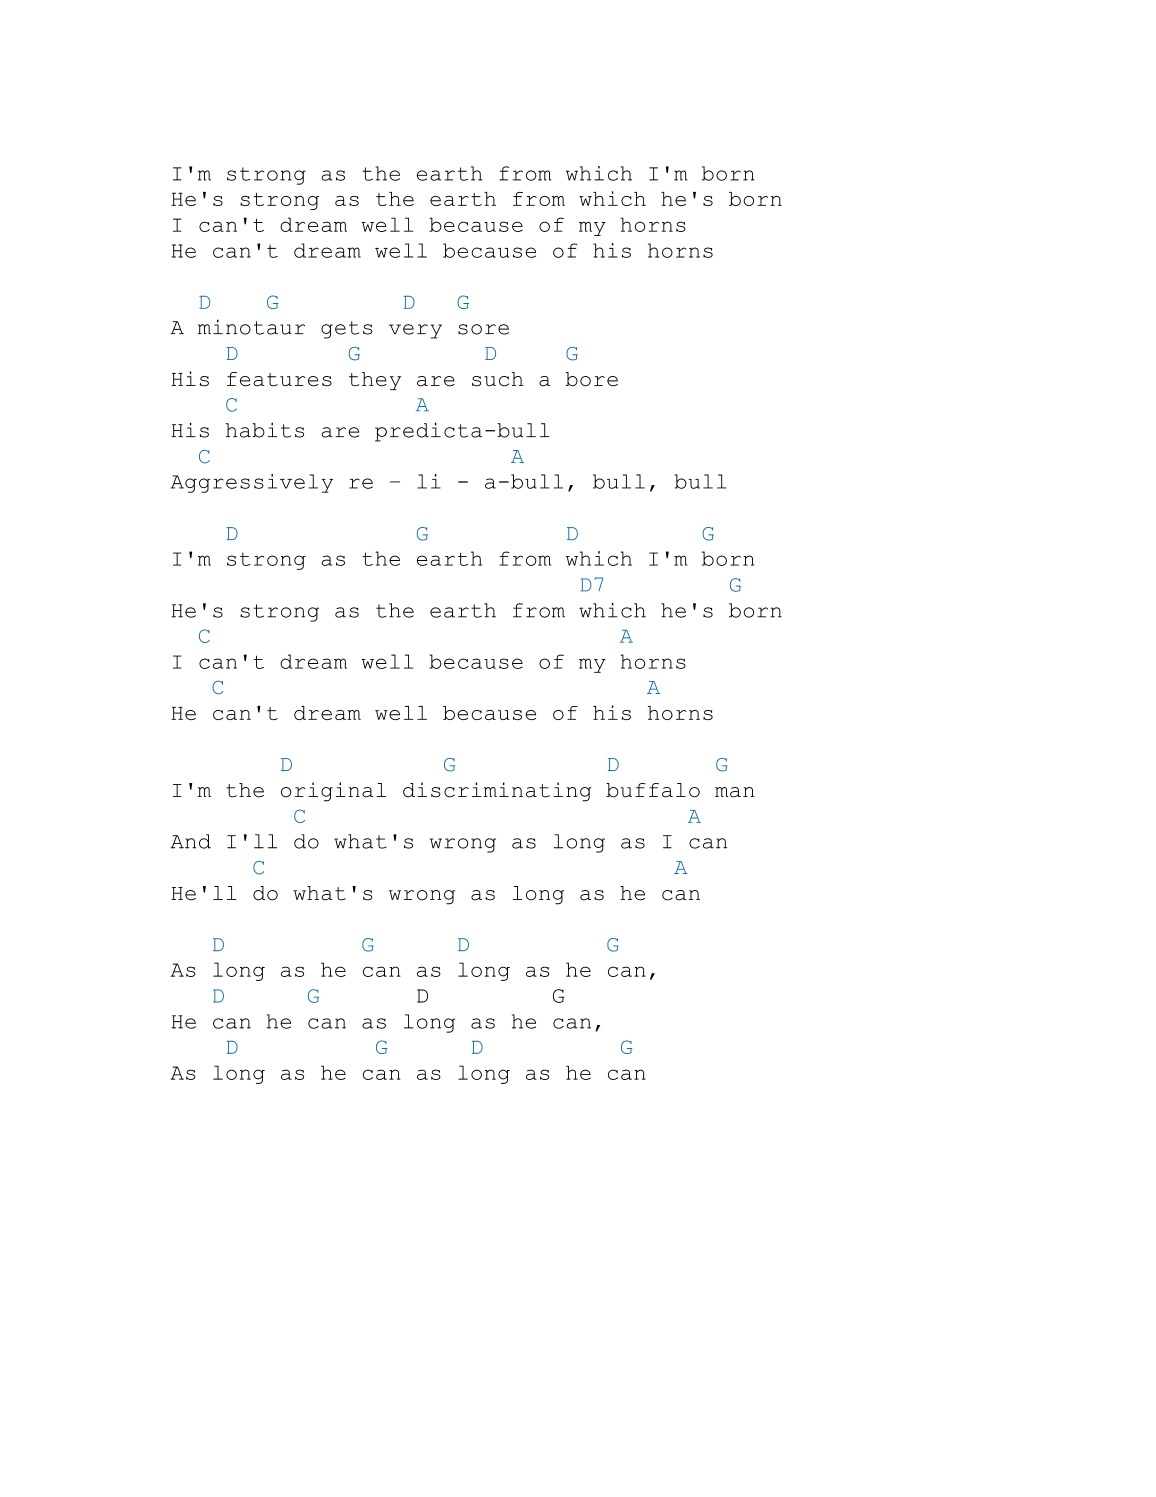 Minotaur Song, The page 3